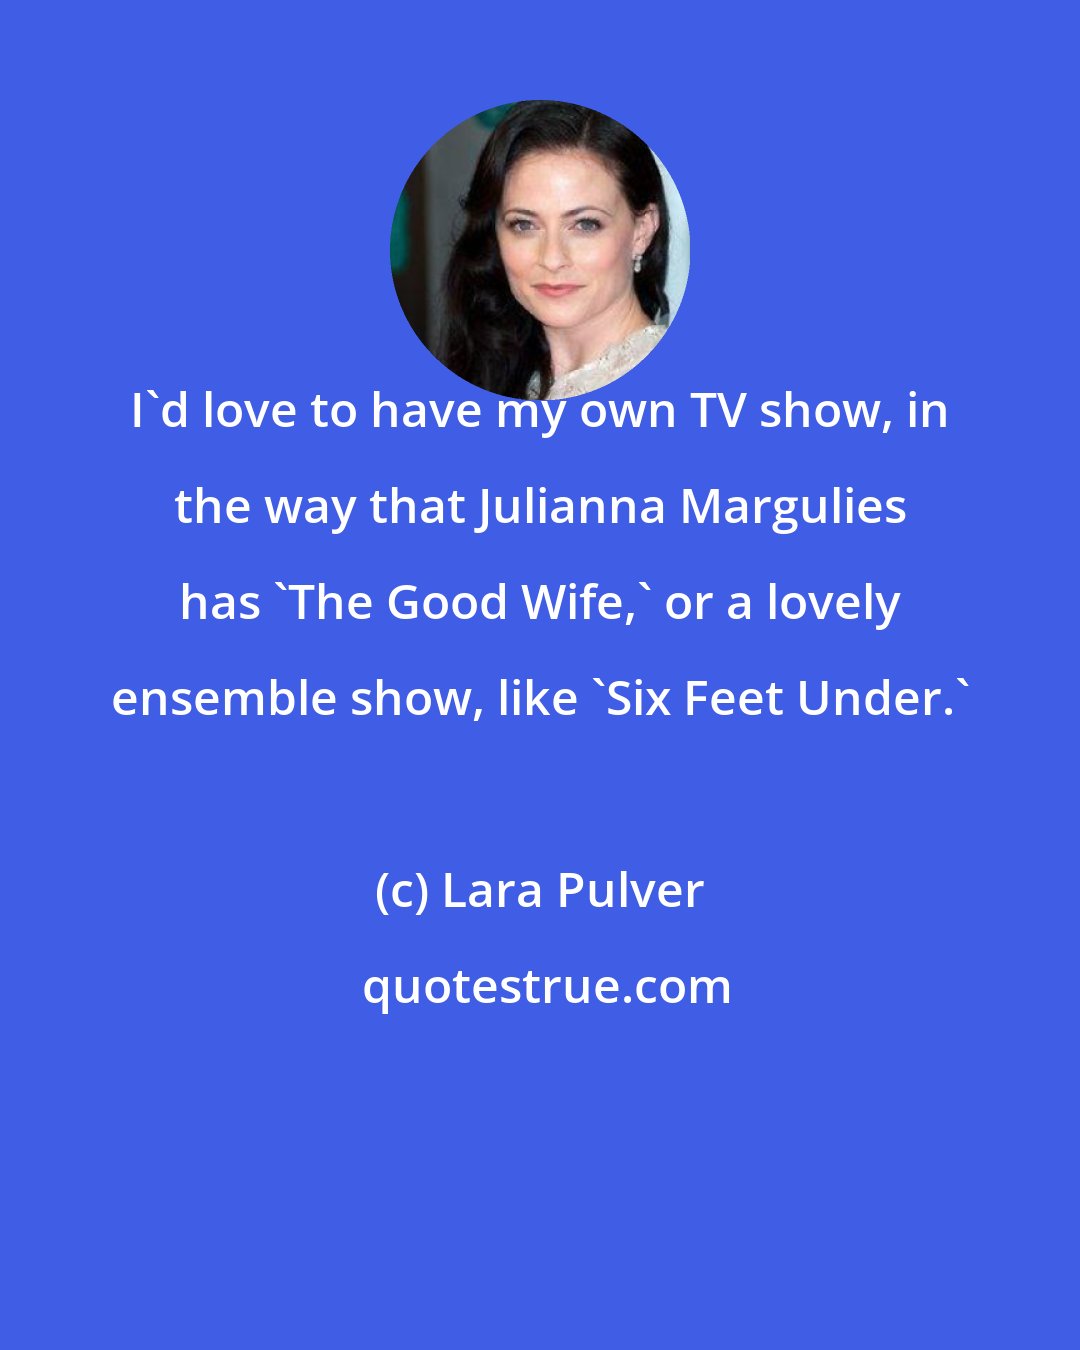 Lara Pulver: I'd love to have my own TV show, in the way that Julianna Margulies has 'The Good Wife,' or a lovely ensemble show, like 'Six Feet Under.'